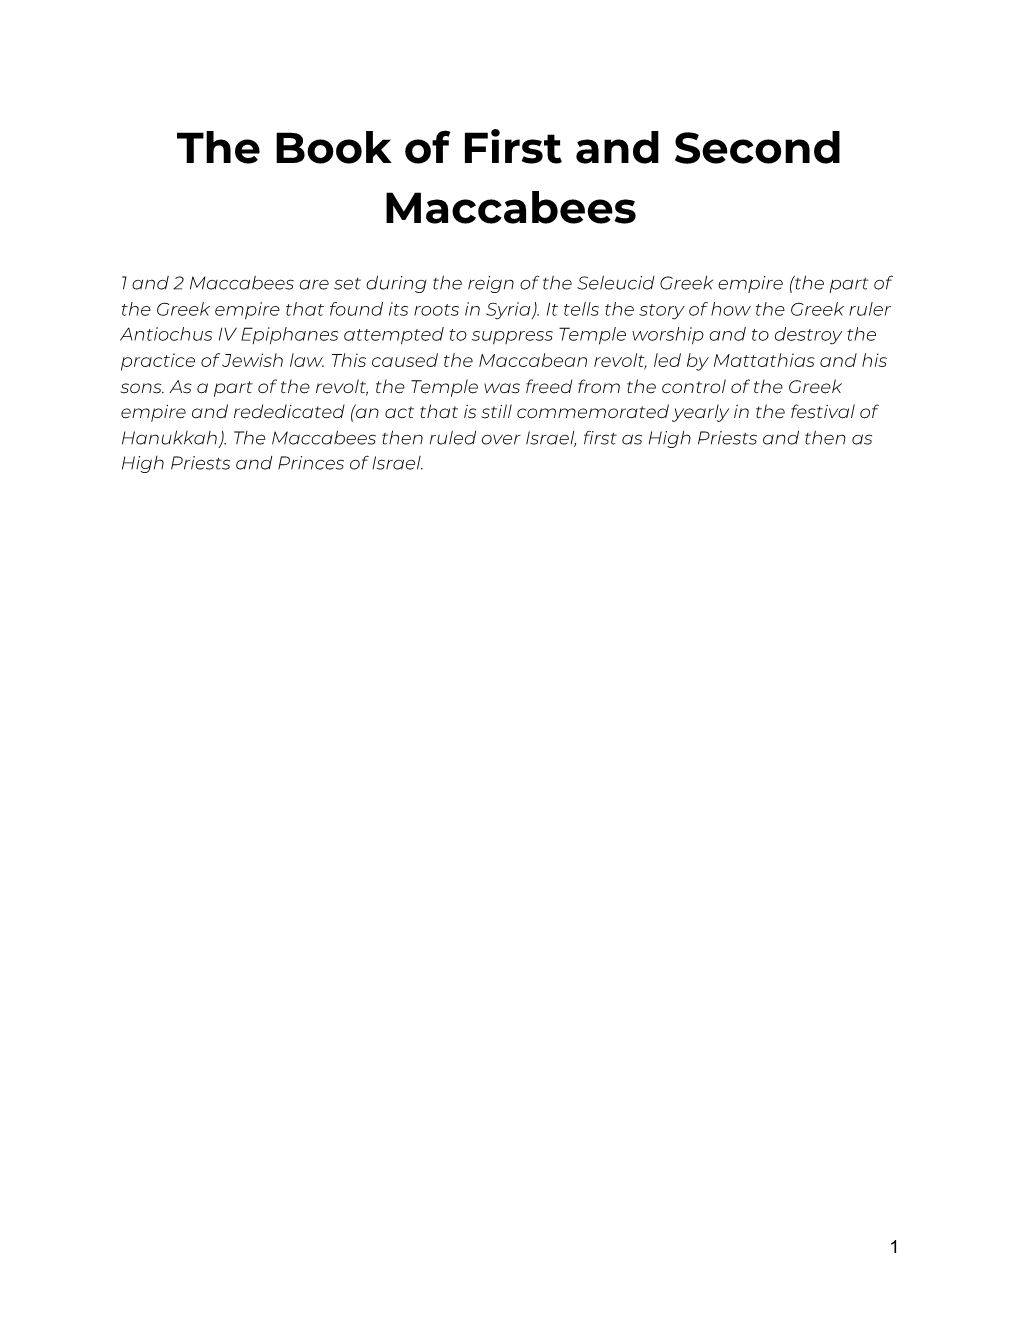 The Book of First and Second Maccabees